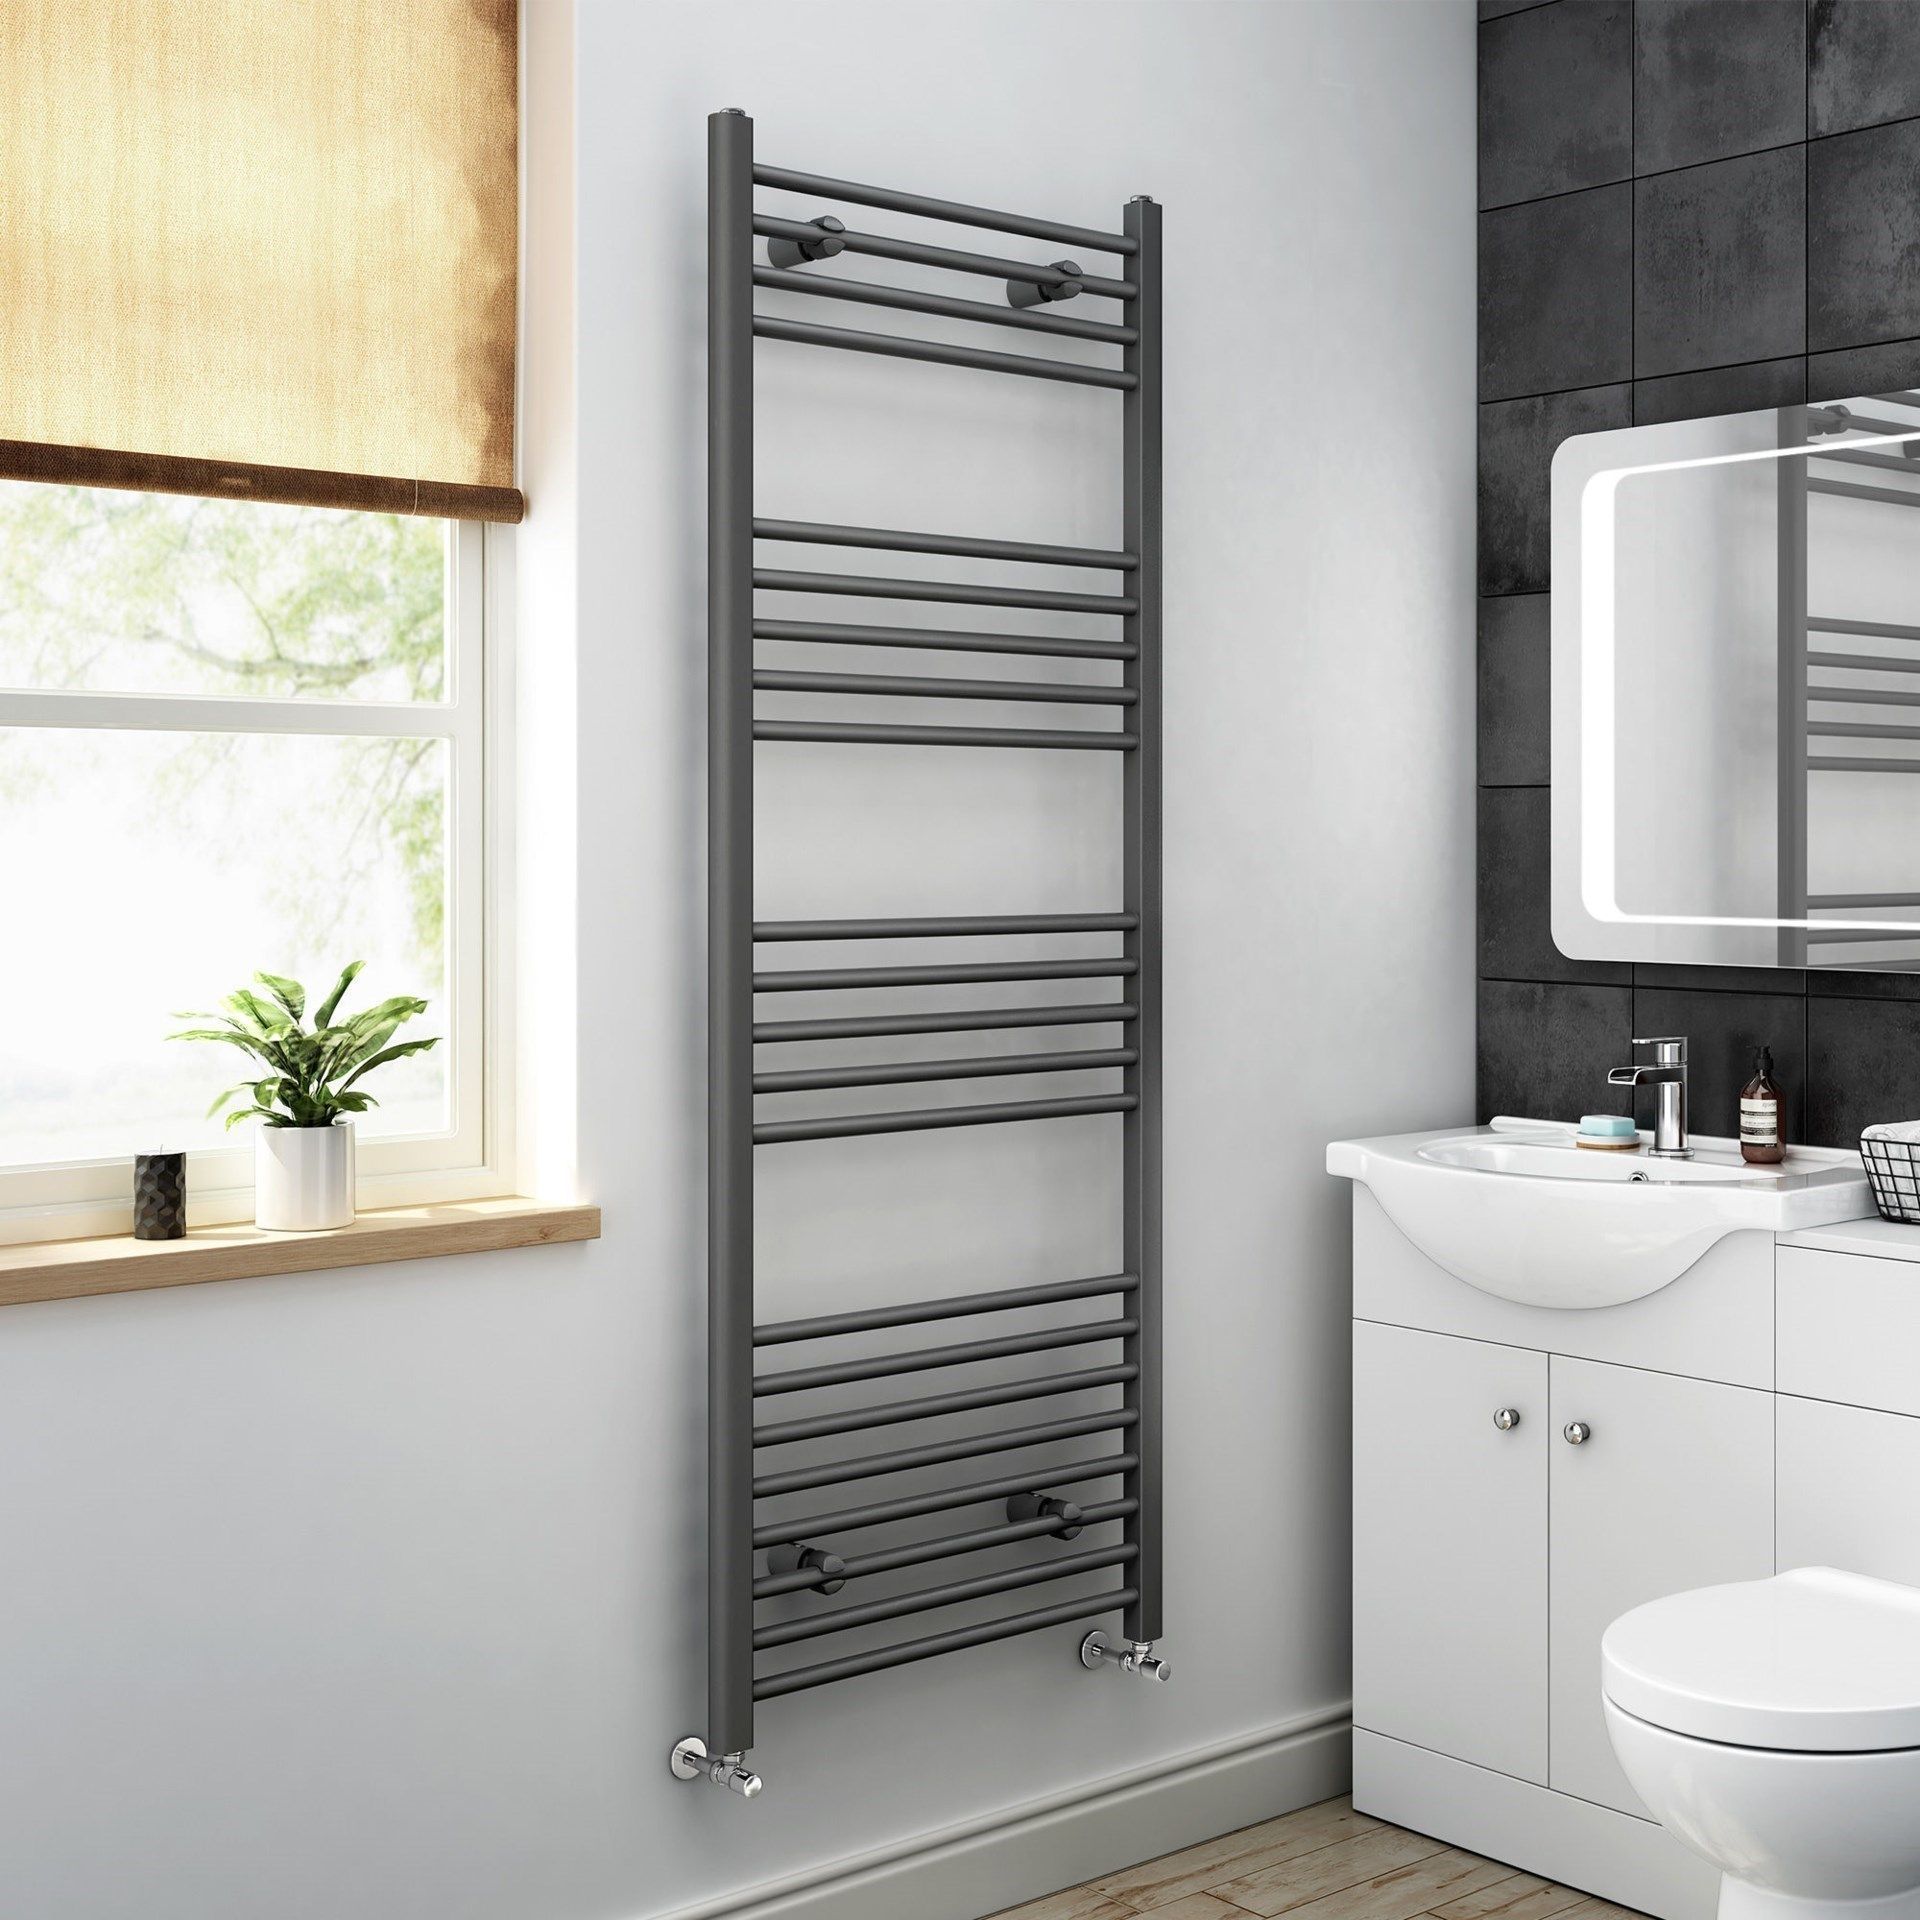 NEW & BOXED 1600x600mm - 20mm Tubes - Anthracite Heated Straight Rail Ladder Towel Radiator.